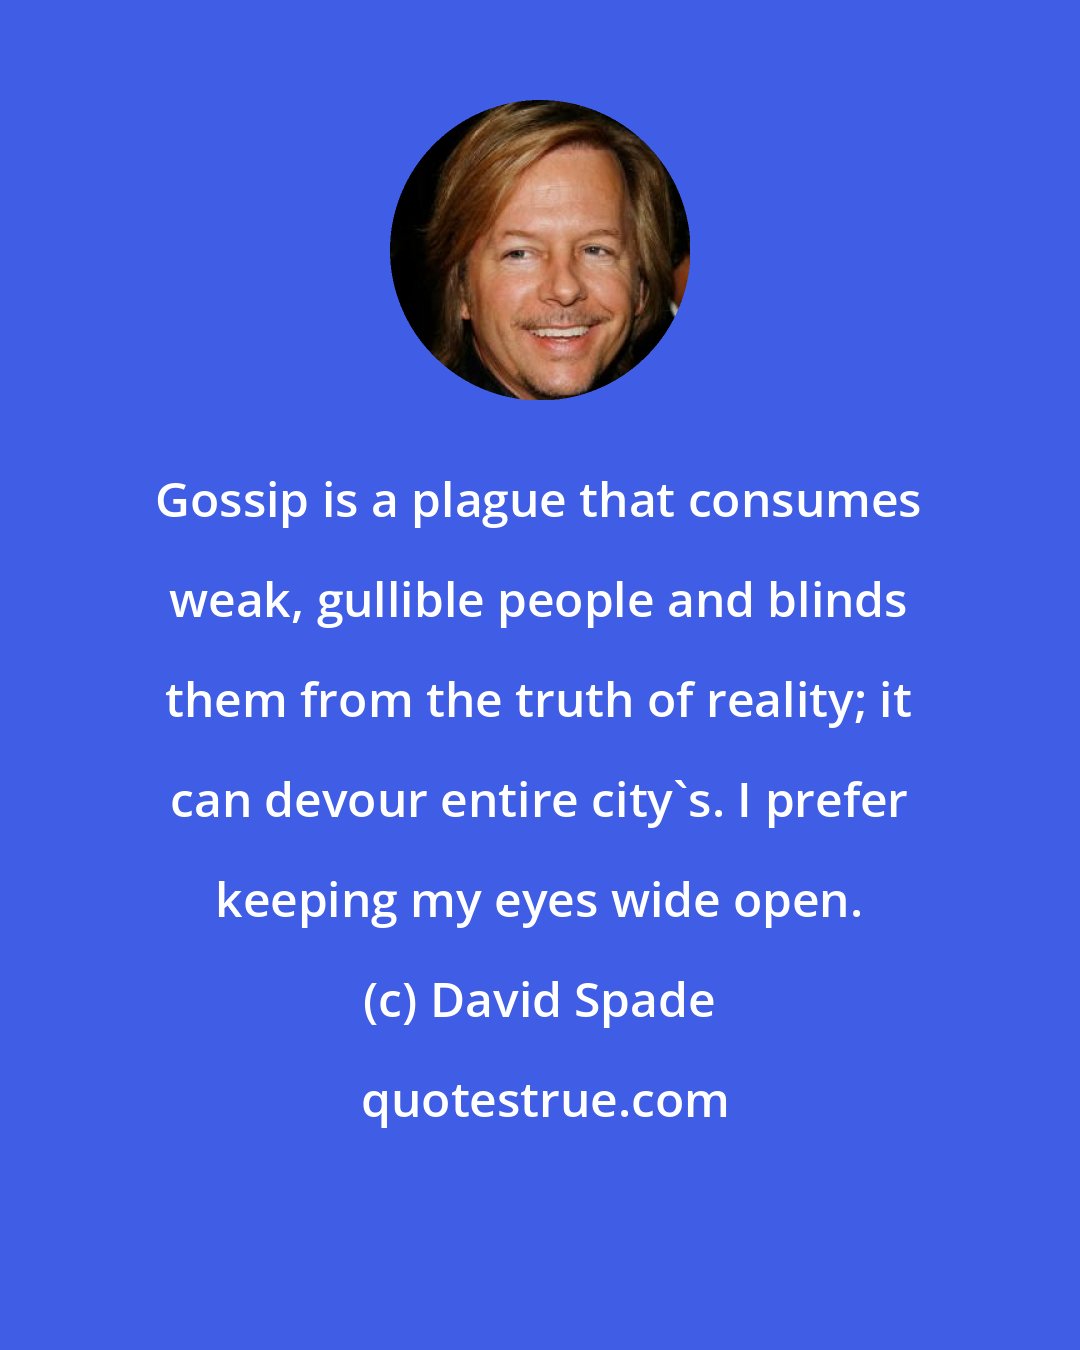 David Spade: Gossip is a plague that consumes weak, gullible people and blinds them from the truth of reality; it can devour entire city's. I prefer keeping my eyes wide open.